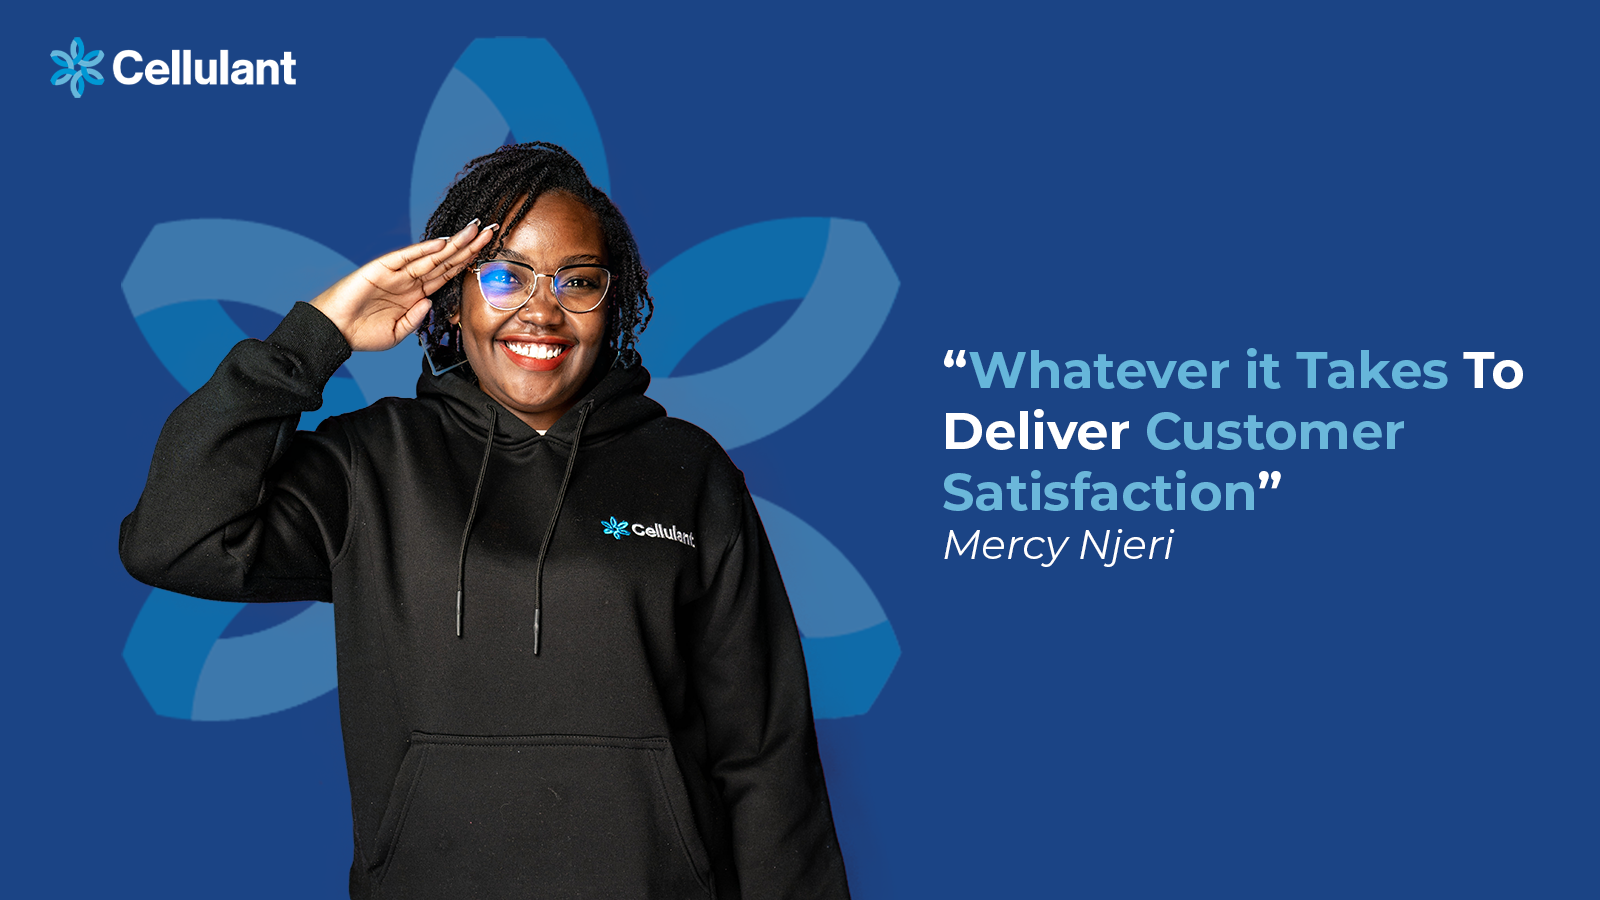 “Whatever it Takes To Deliver Customer Satisfaction” -Mercy Njeri